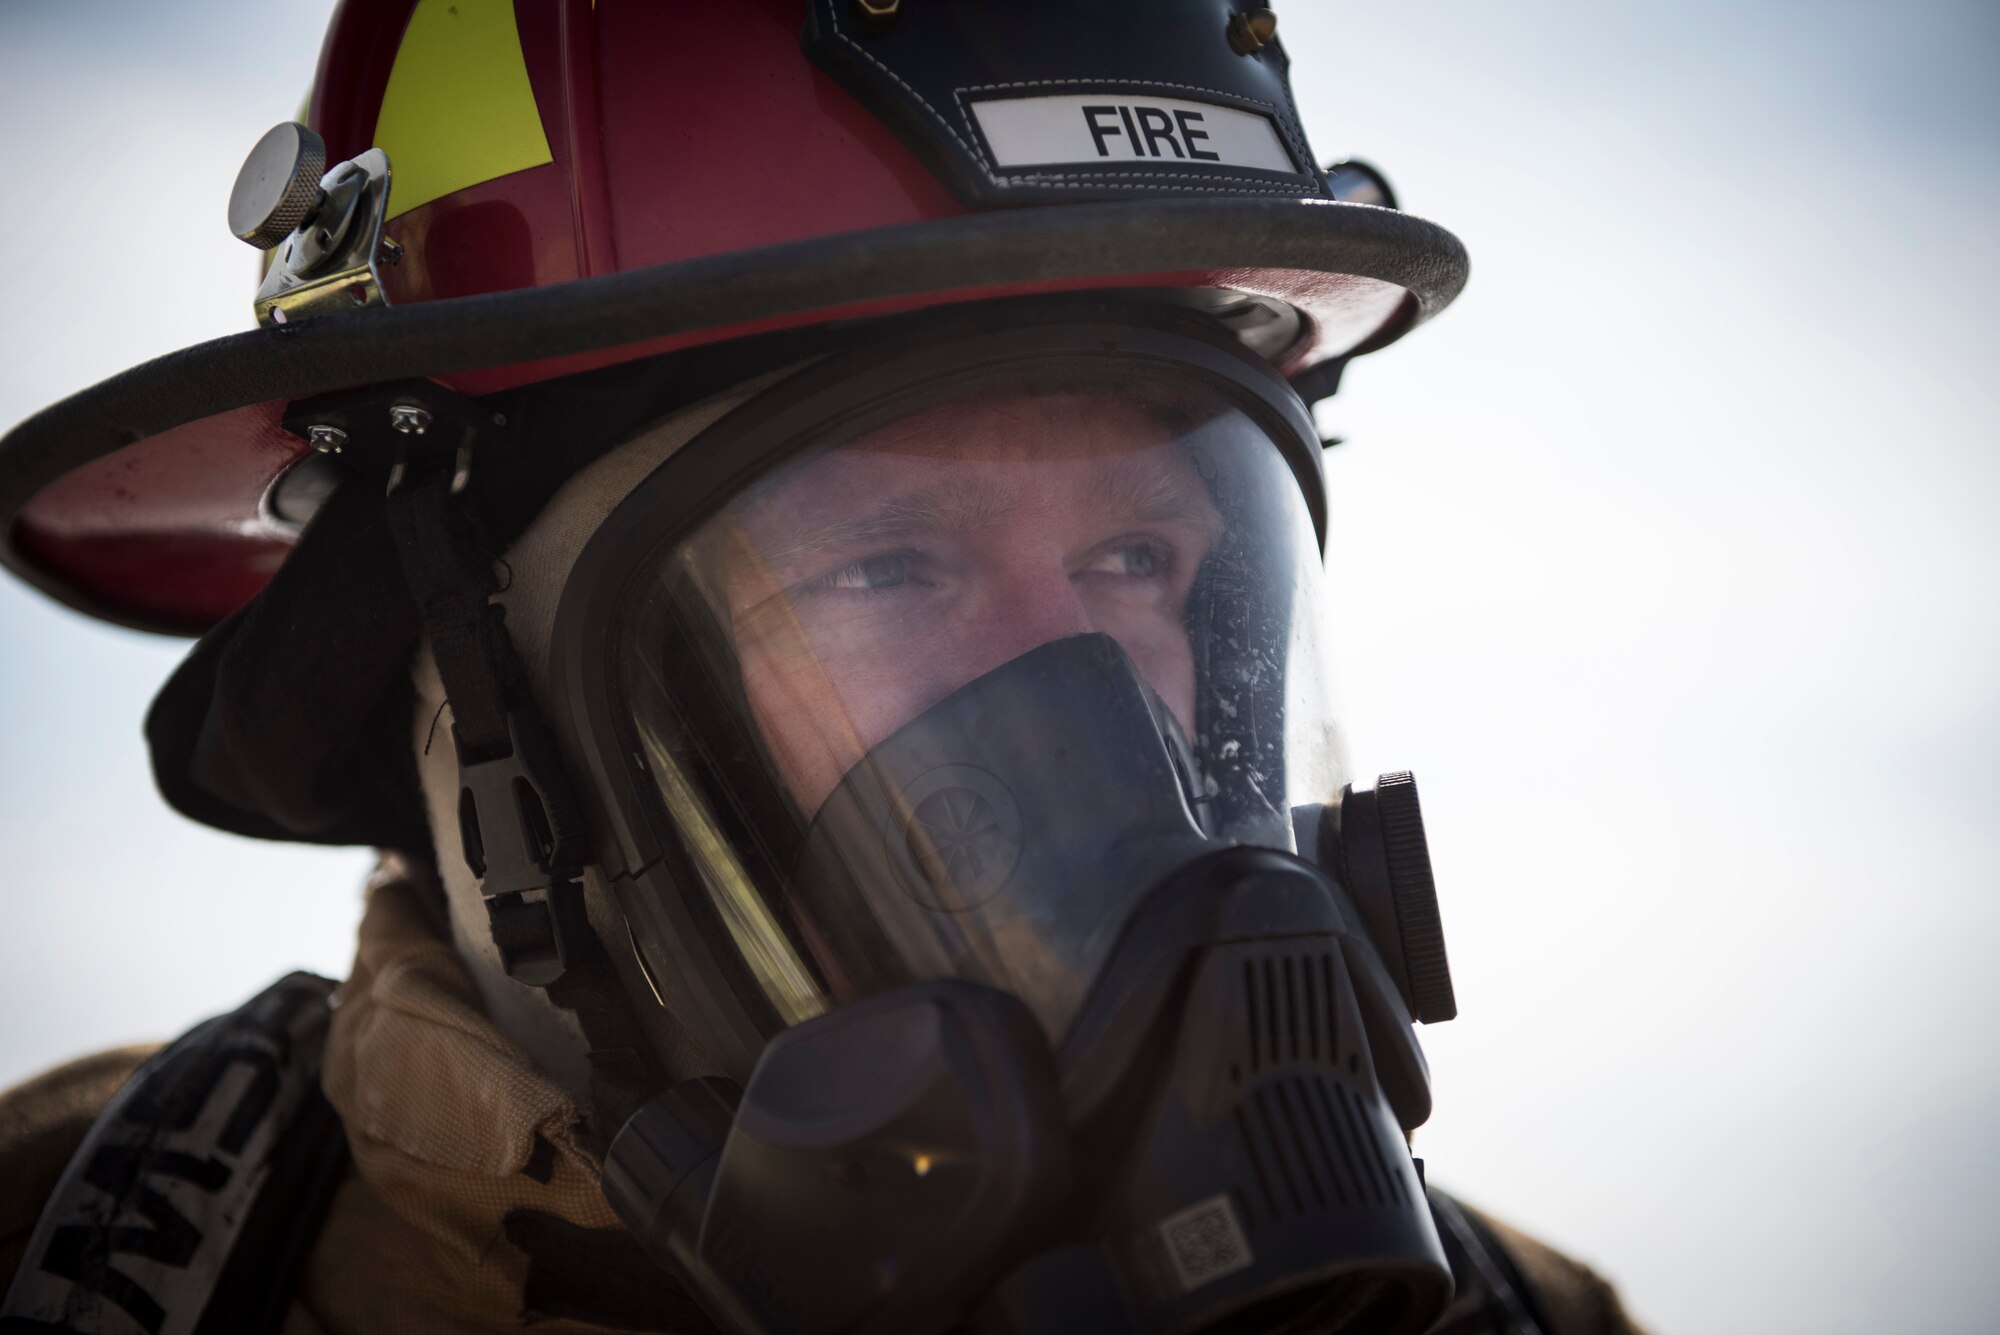 Tech Sgt. Kaleb Draper, a firefighter assigned to the 332d Expeditionary Civil Engineer Squadron, assesses a simulated incident scene during emergency egress training February 14, 2018 in Southwest Asia. Air Force firefighters train constantly for a great number of scenarios, including structure fires, aircraft crashes, and hazardous material mishaps. (U.S. Air Force photo by Staff Sgt. Joshua Kleinholz)